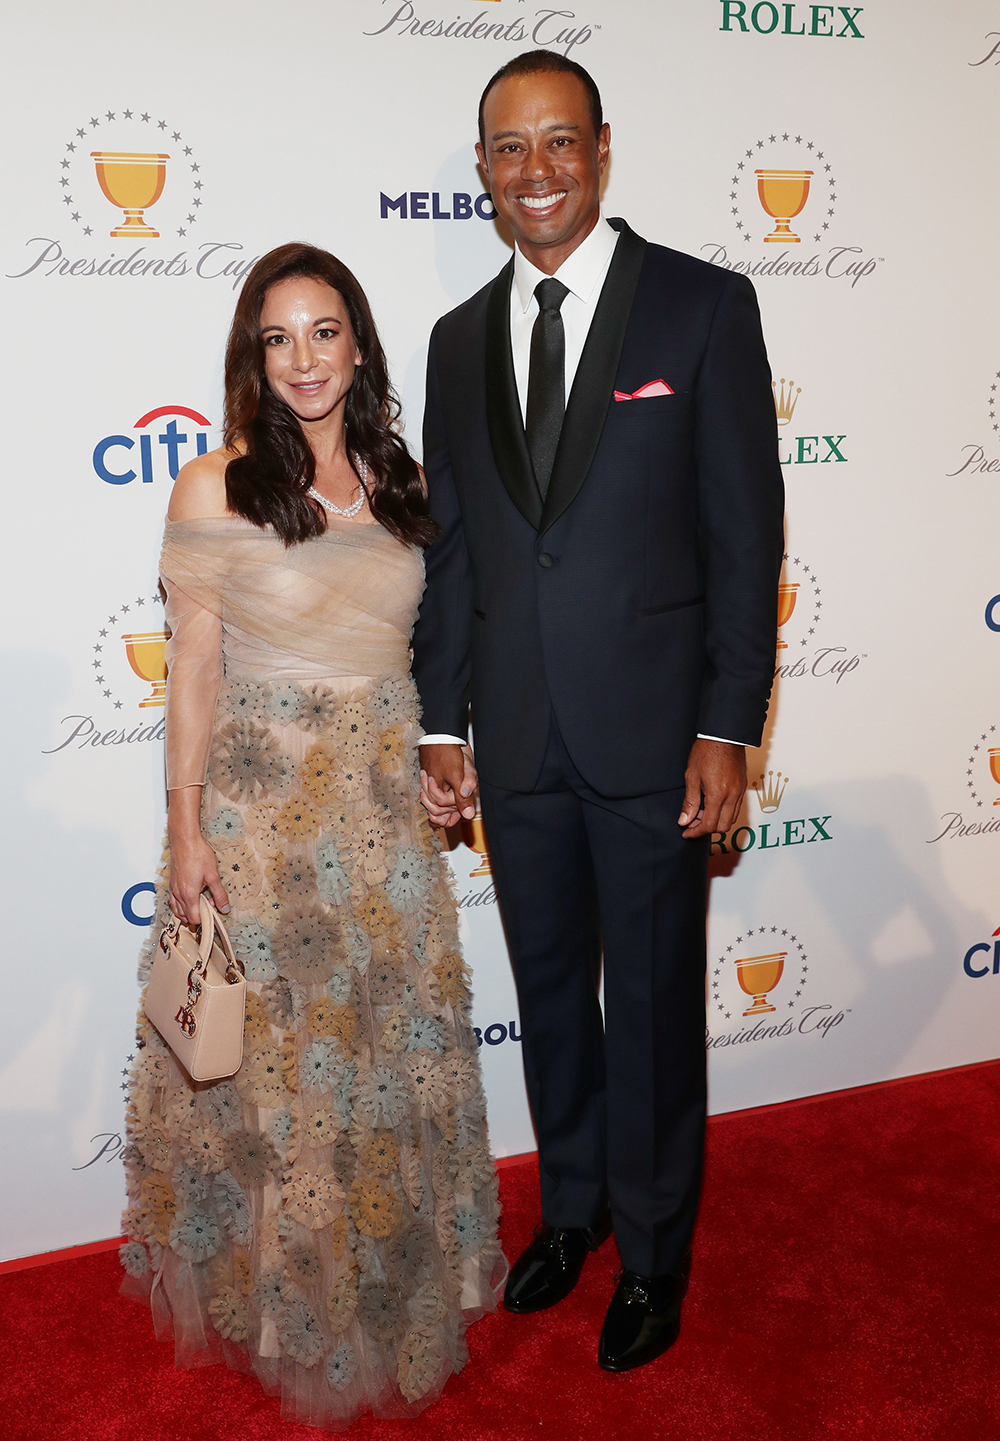 Tiger Woods and Erica Herman – Pics Of The Couple pic